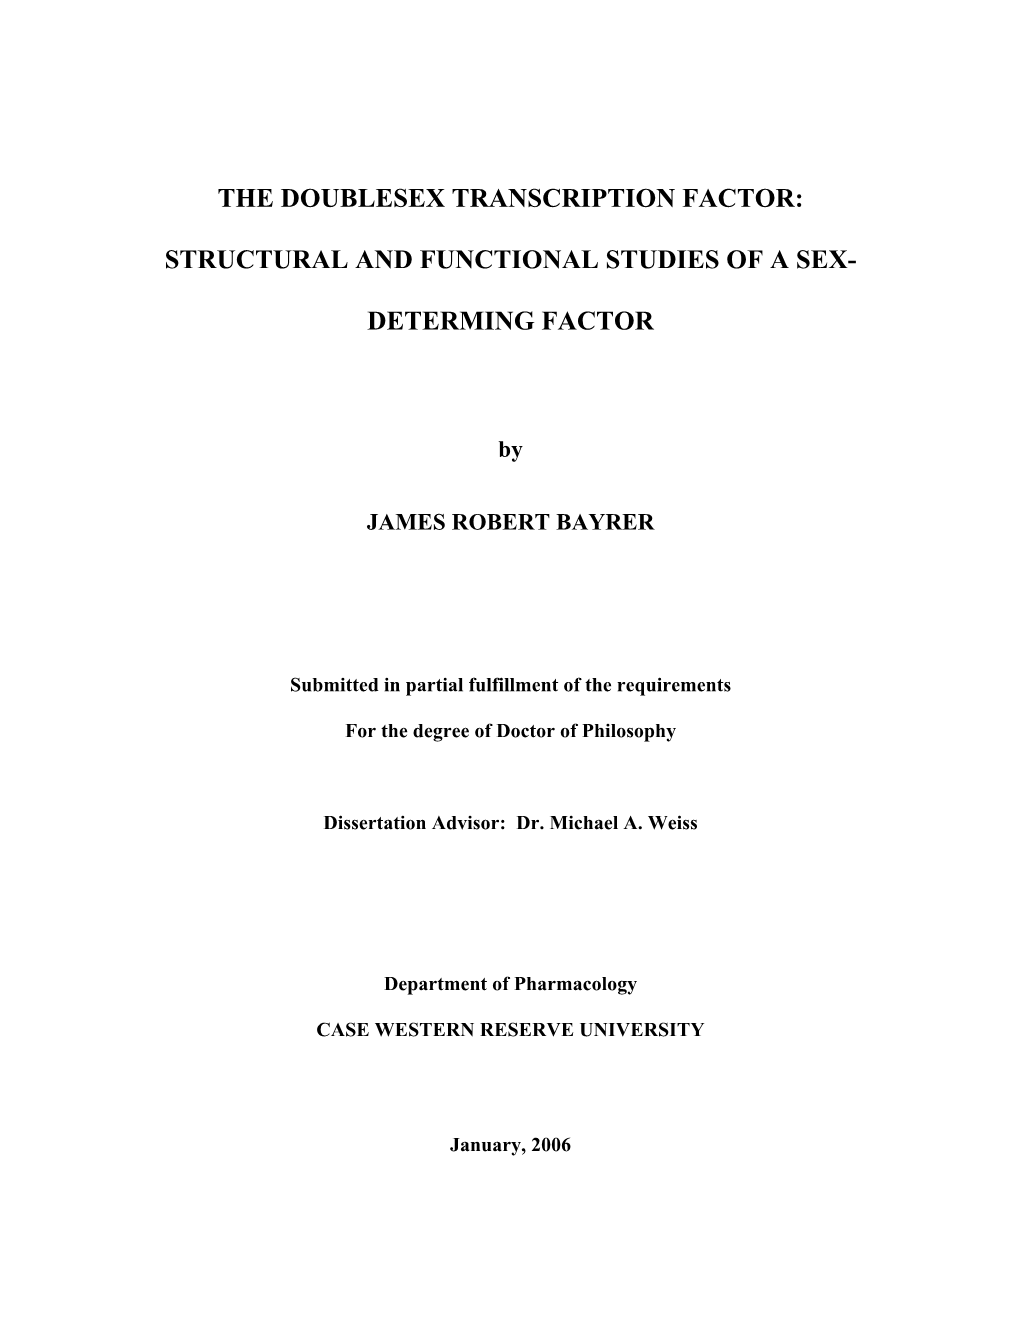 The Doublesex Transcription Factor: Structural and Functional Studies of a Sex-Determining Factor